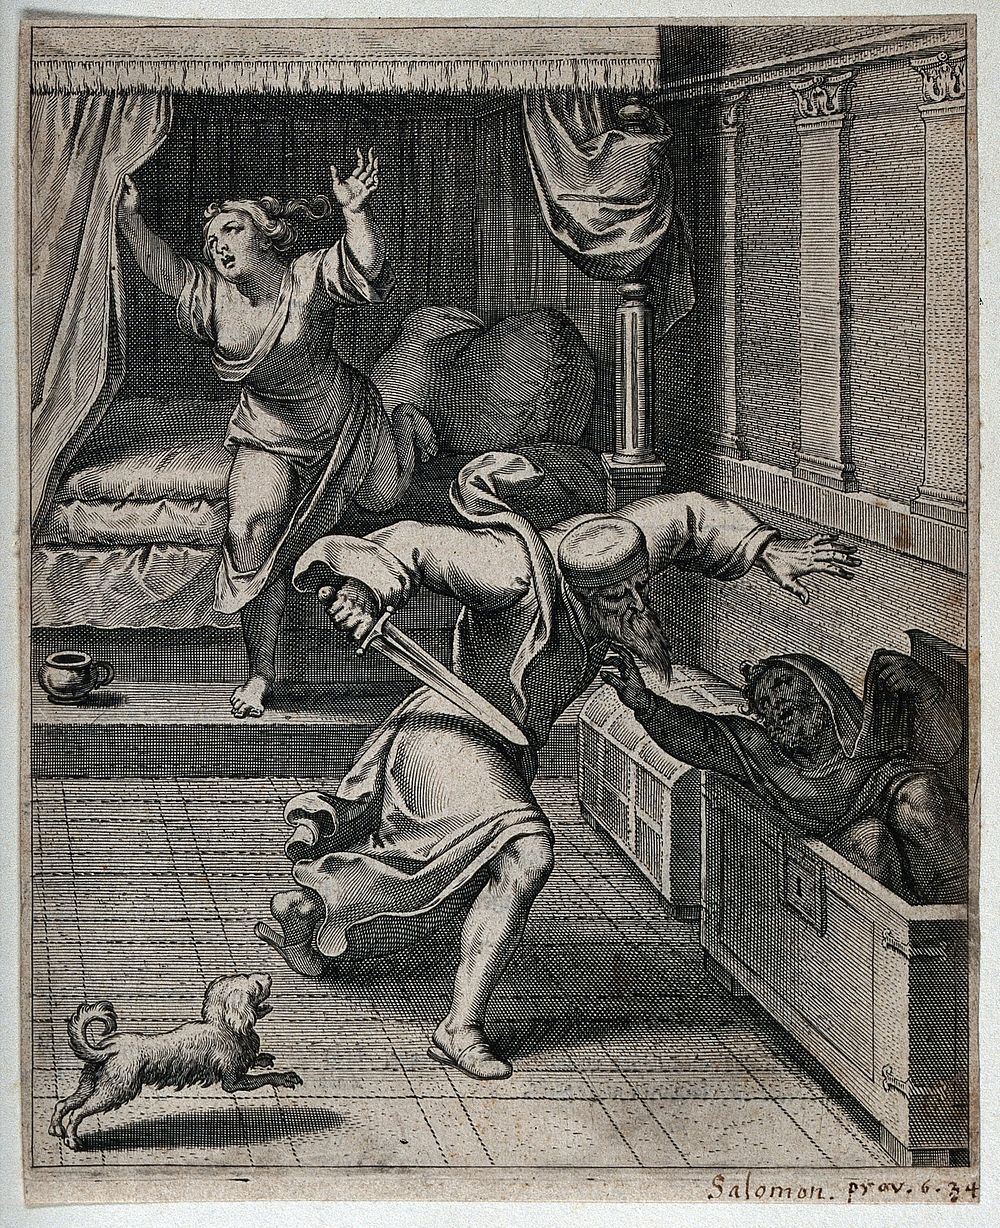 A furious cuckold rushes at his rival with a sword; representing vice as its own punishment. Engraving after O. van Veen…